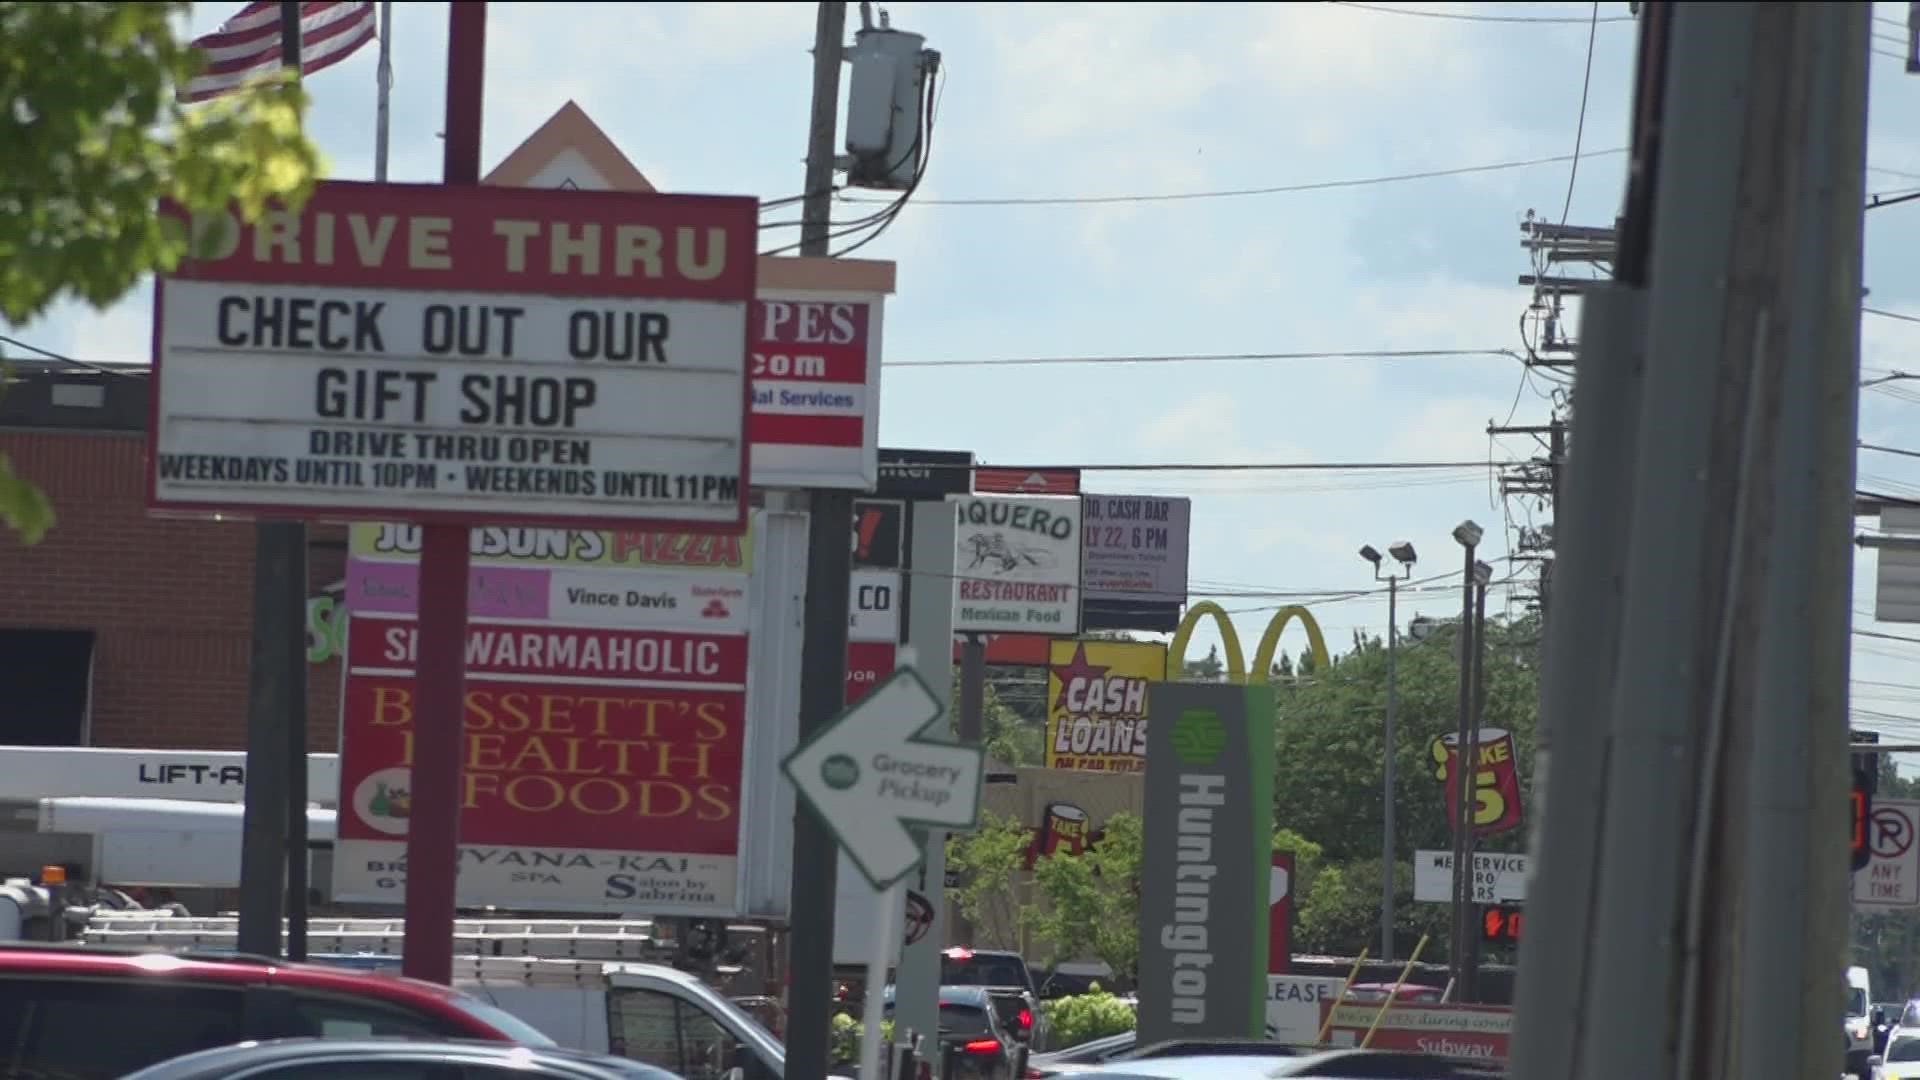 Toledo Plan Commission approves plans to demolish church and build new fast food restaurant.